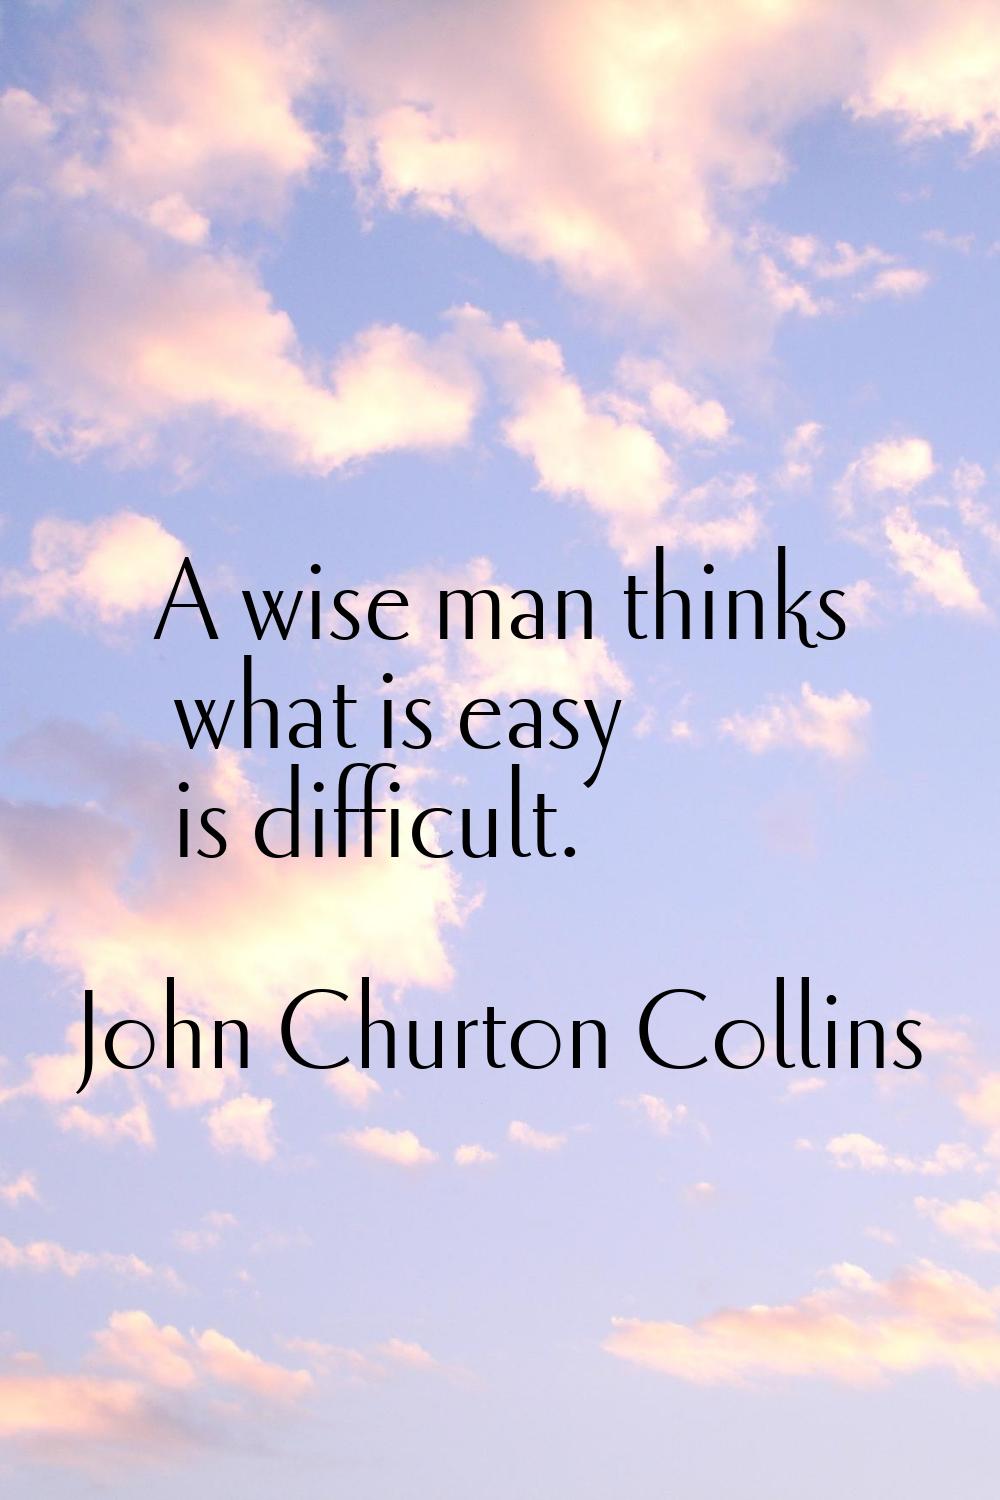 A wise man thinks what is easy is difficult.